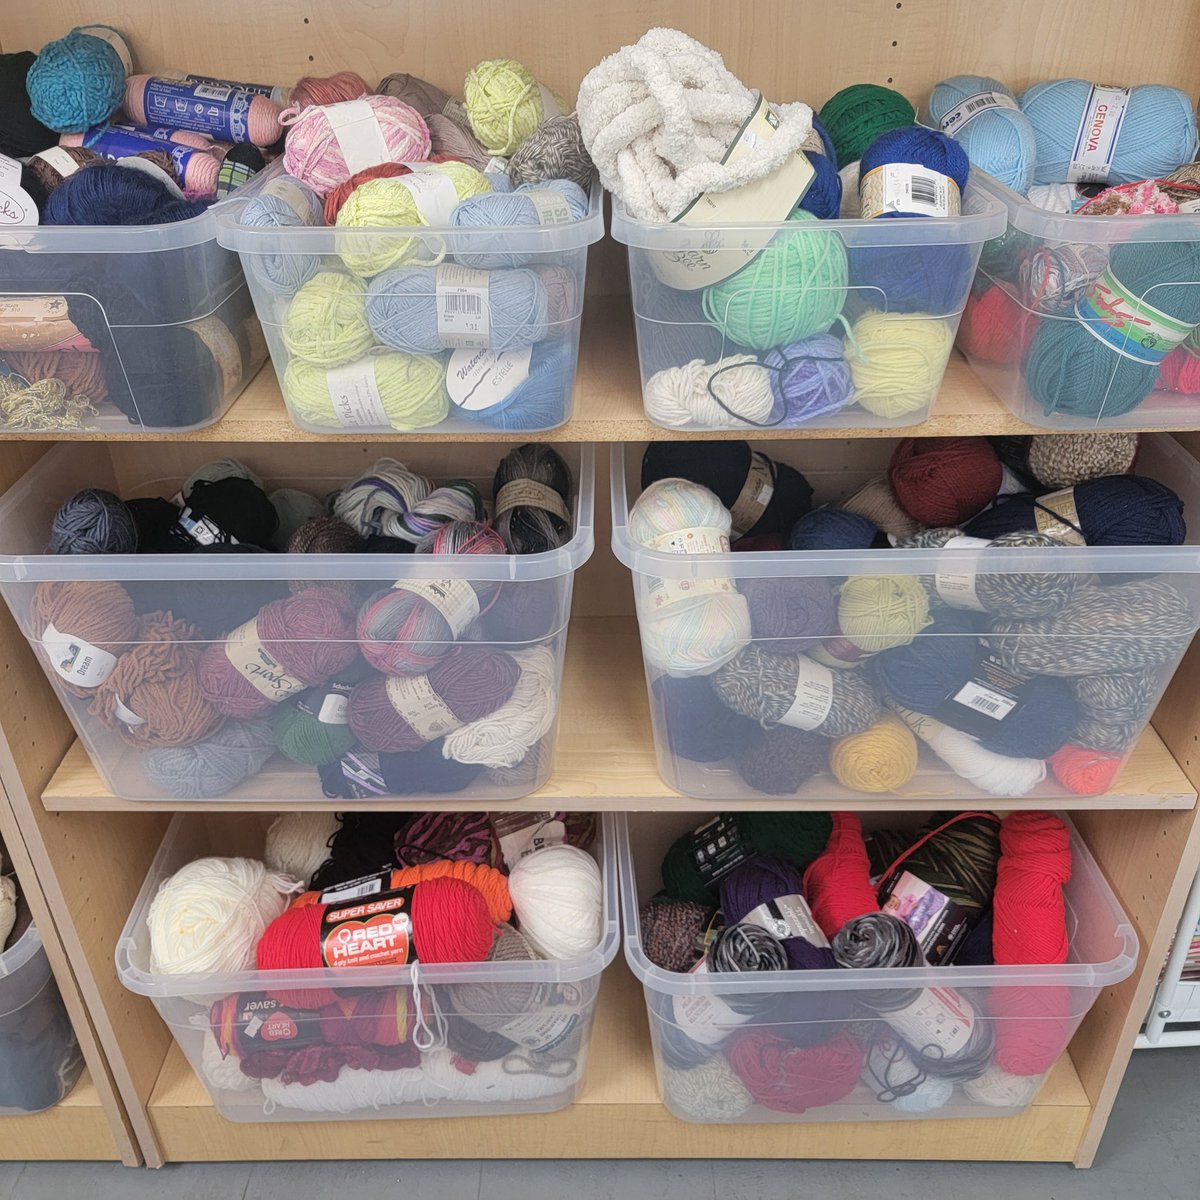 🧶🎨 Are you a knitter or crocheter looking for the perfect yarn for your next project? Look no further than Bottom of the Bin! We have a huge selection of yarn in a variety color, texture, and weight. Come see us today! #yarnlove #knitting #bottomofthebin #SeminoleFL